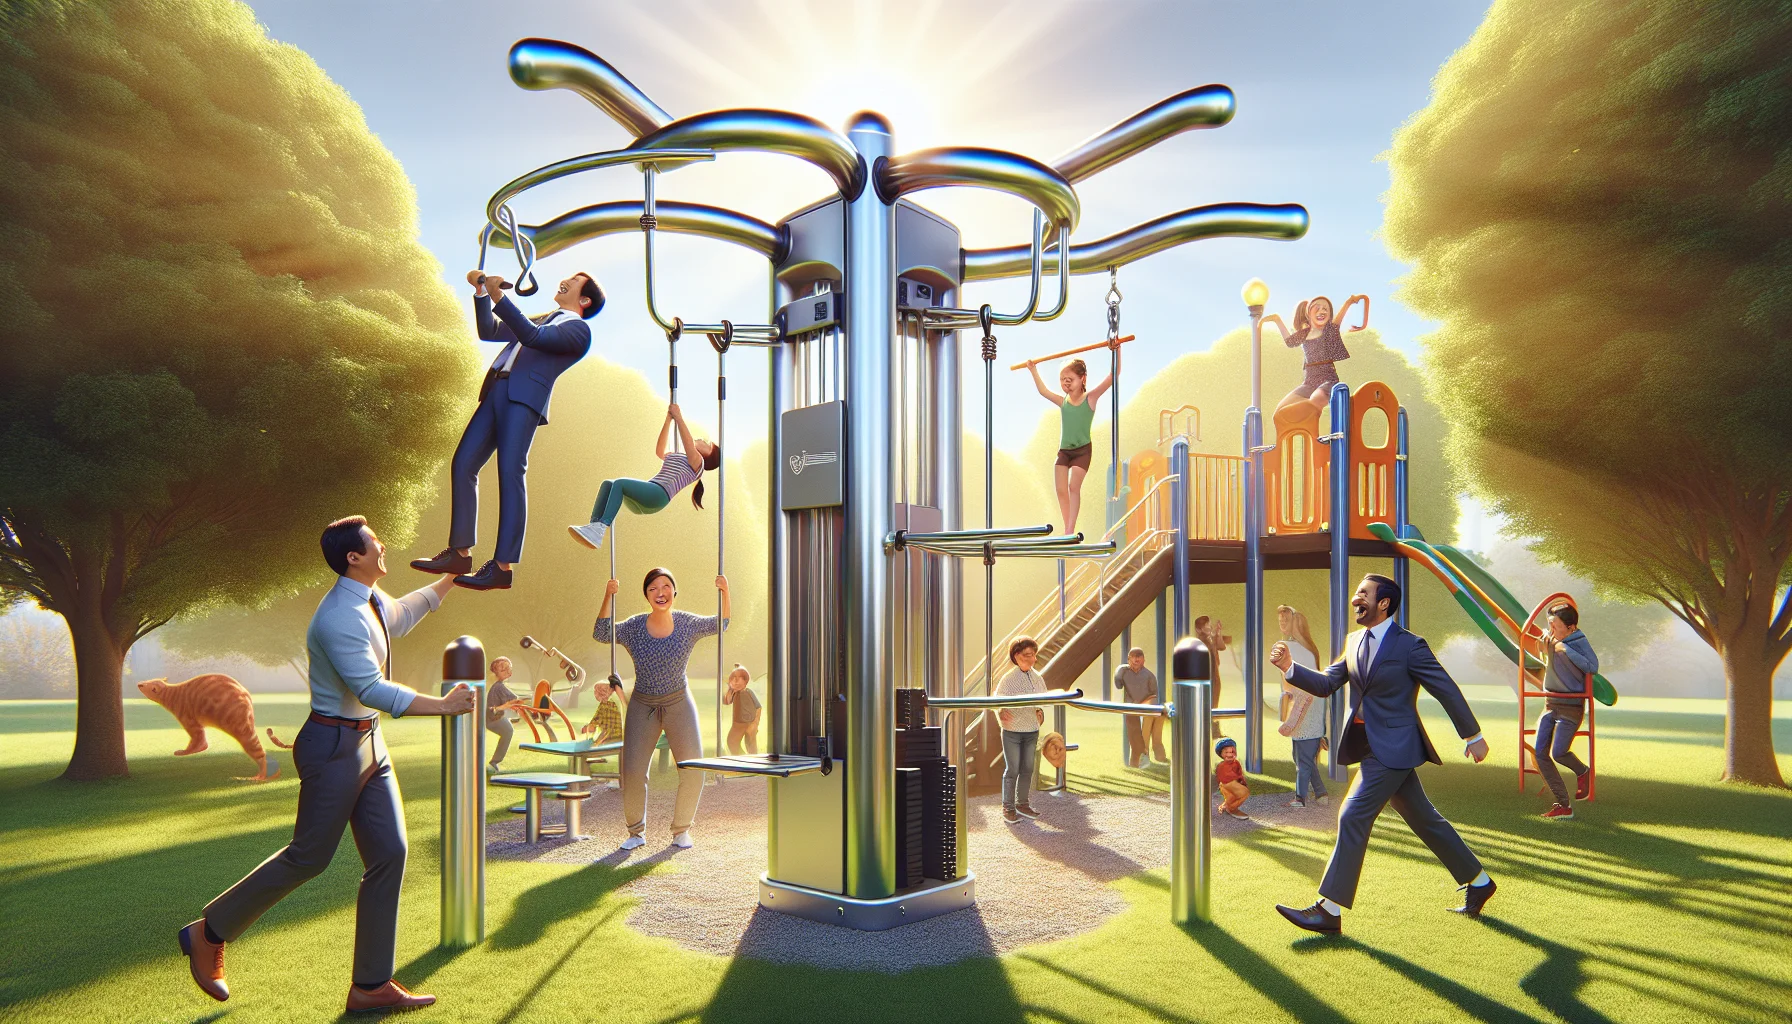 Imagine a colourful, realistic scene in a bright, sunshine-filled park. In its center, a shining, advanced calisthenics machine awaits, almost like an inviting jungle-gym for adults. There are a variety of individuals interacting with it in humorous ways. A South Asian man in a business suit is attempting a pull-up while still keeping his tie straight. A Hispanic woman in her casual wear is giggling as she balances on one of the beams. A Middle-Eastern child is playing around the machine, pretend it's a spaceship. The whole scene promotes a playful atmosphere, subtly encouraging exercise through fun and laughter.